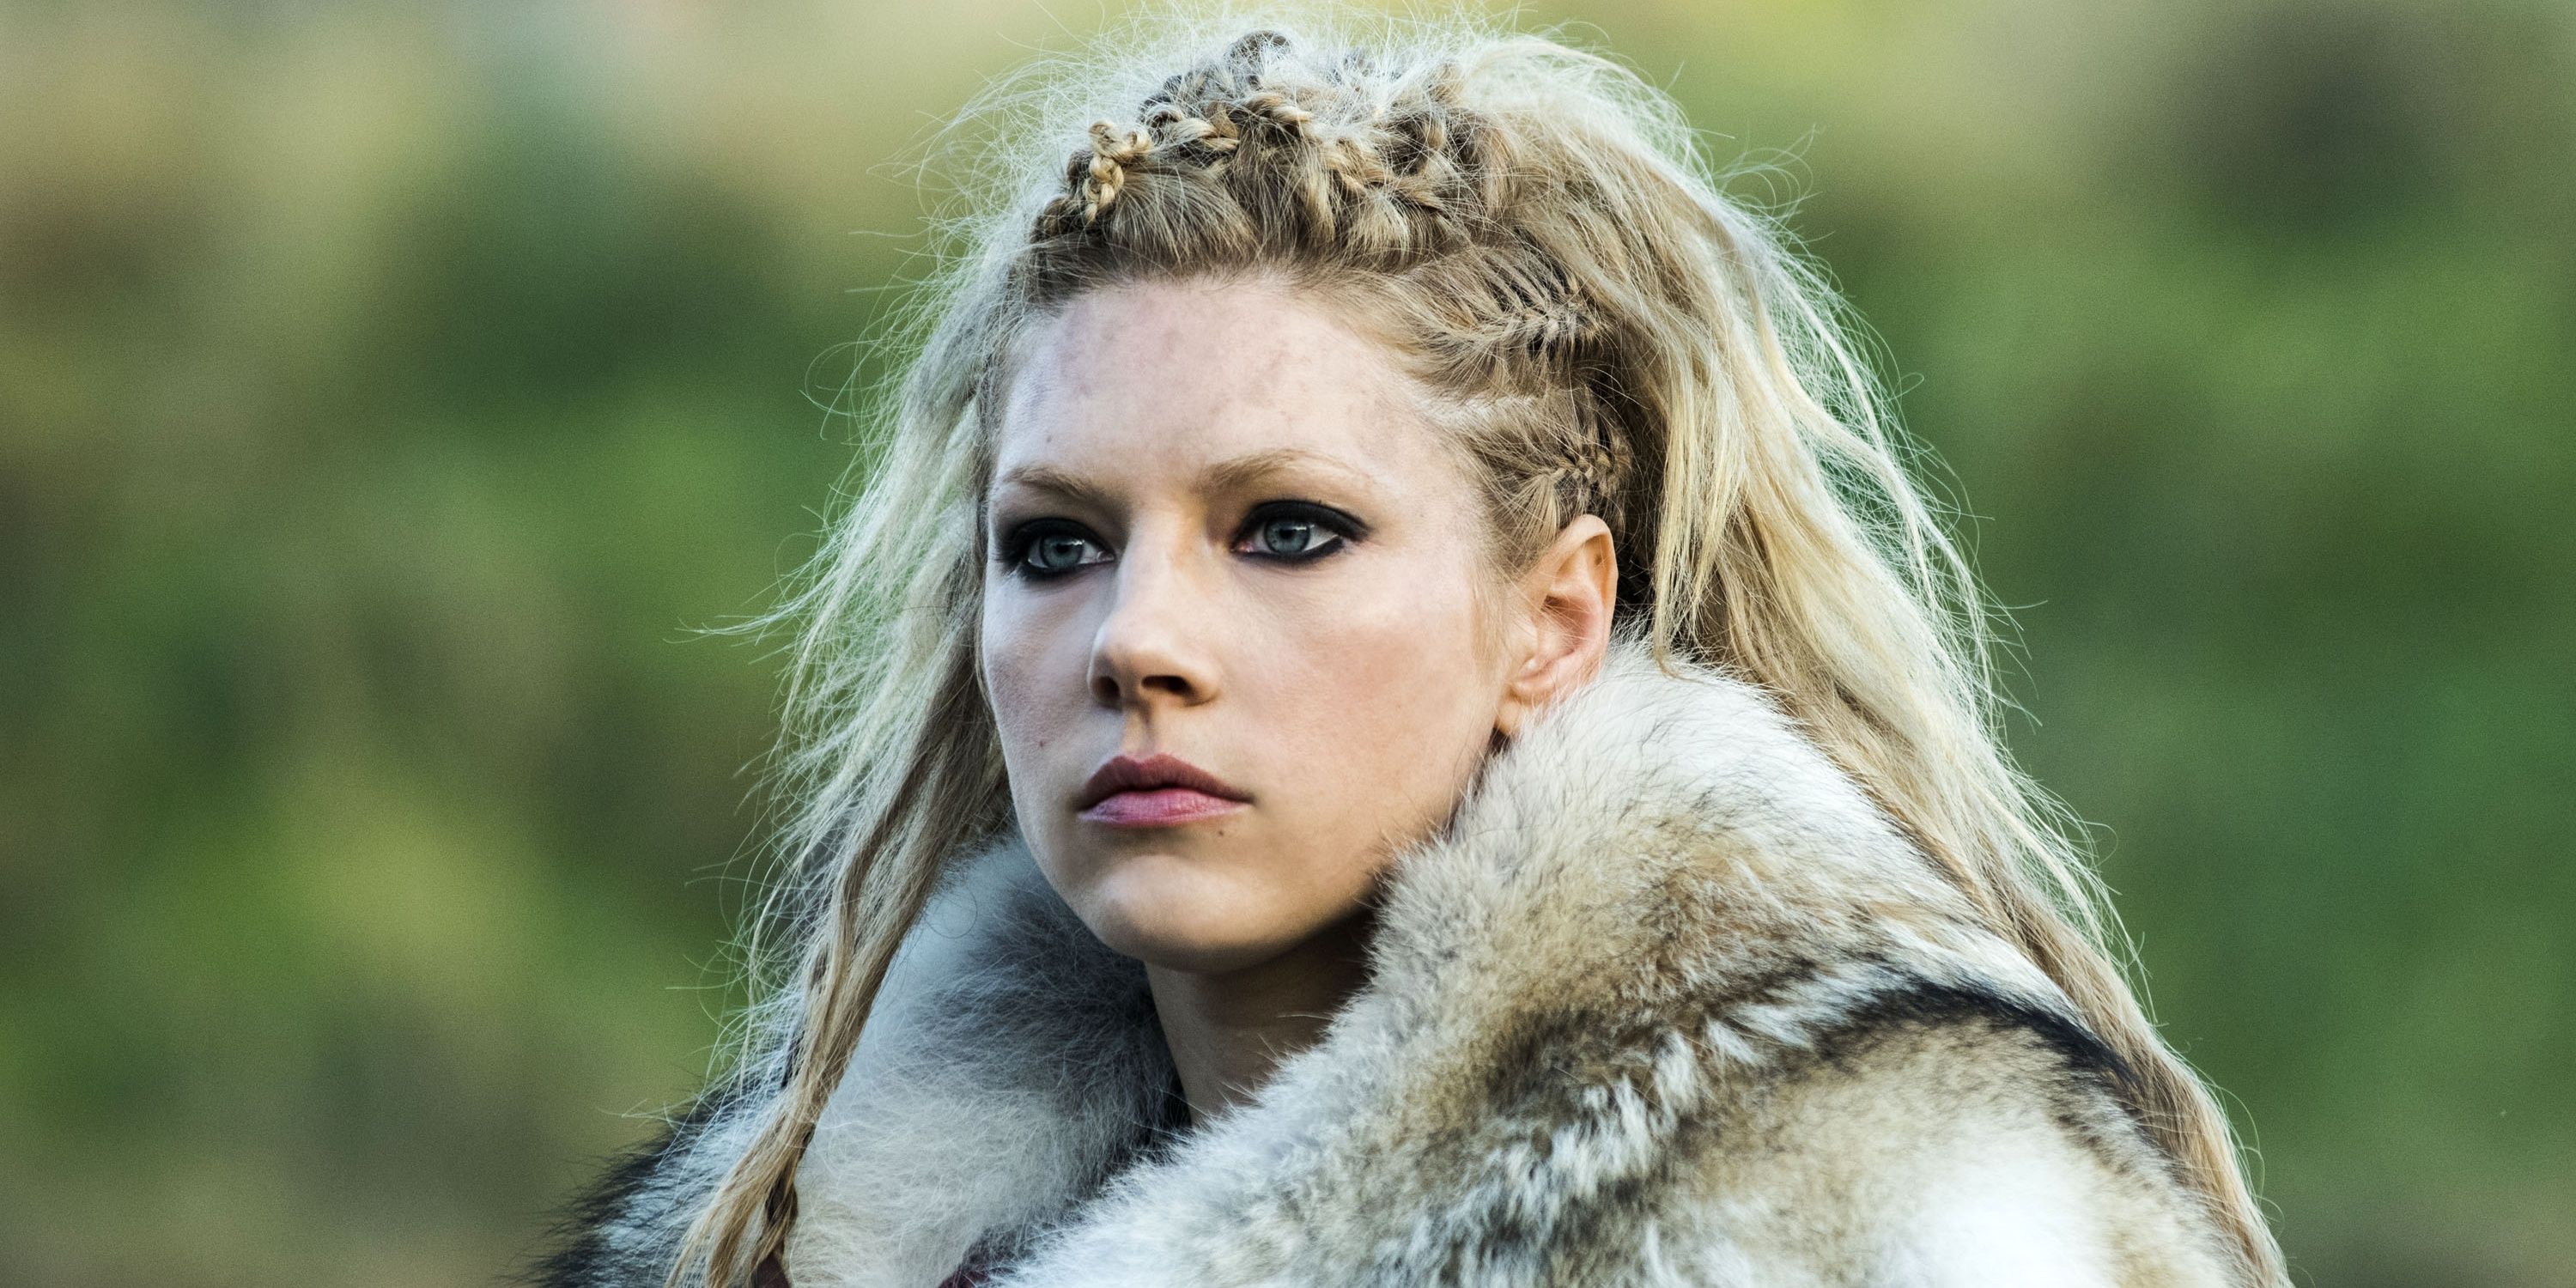 Lagertha announces herself as the one and only Earl in Vikings